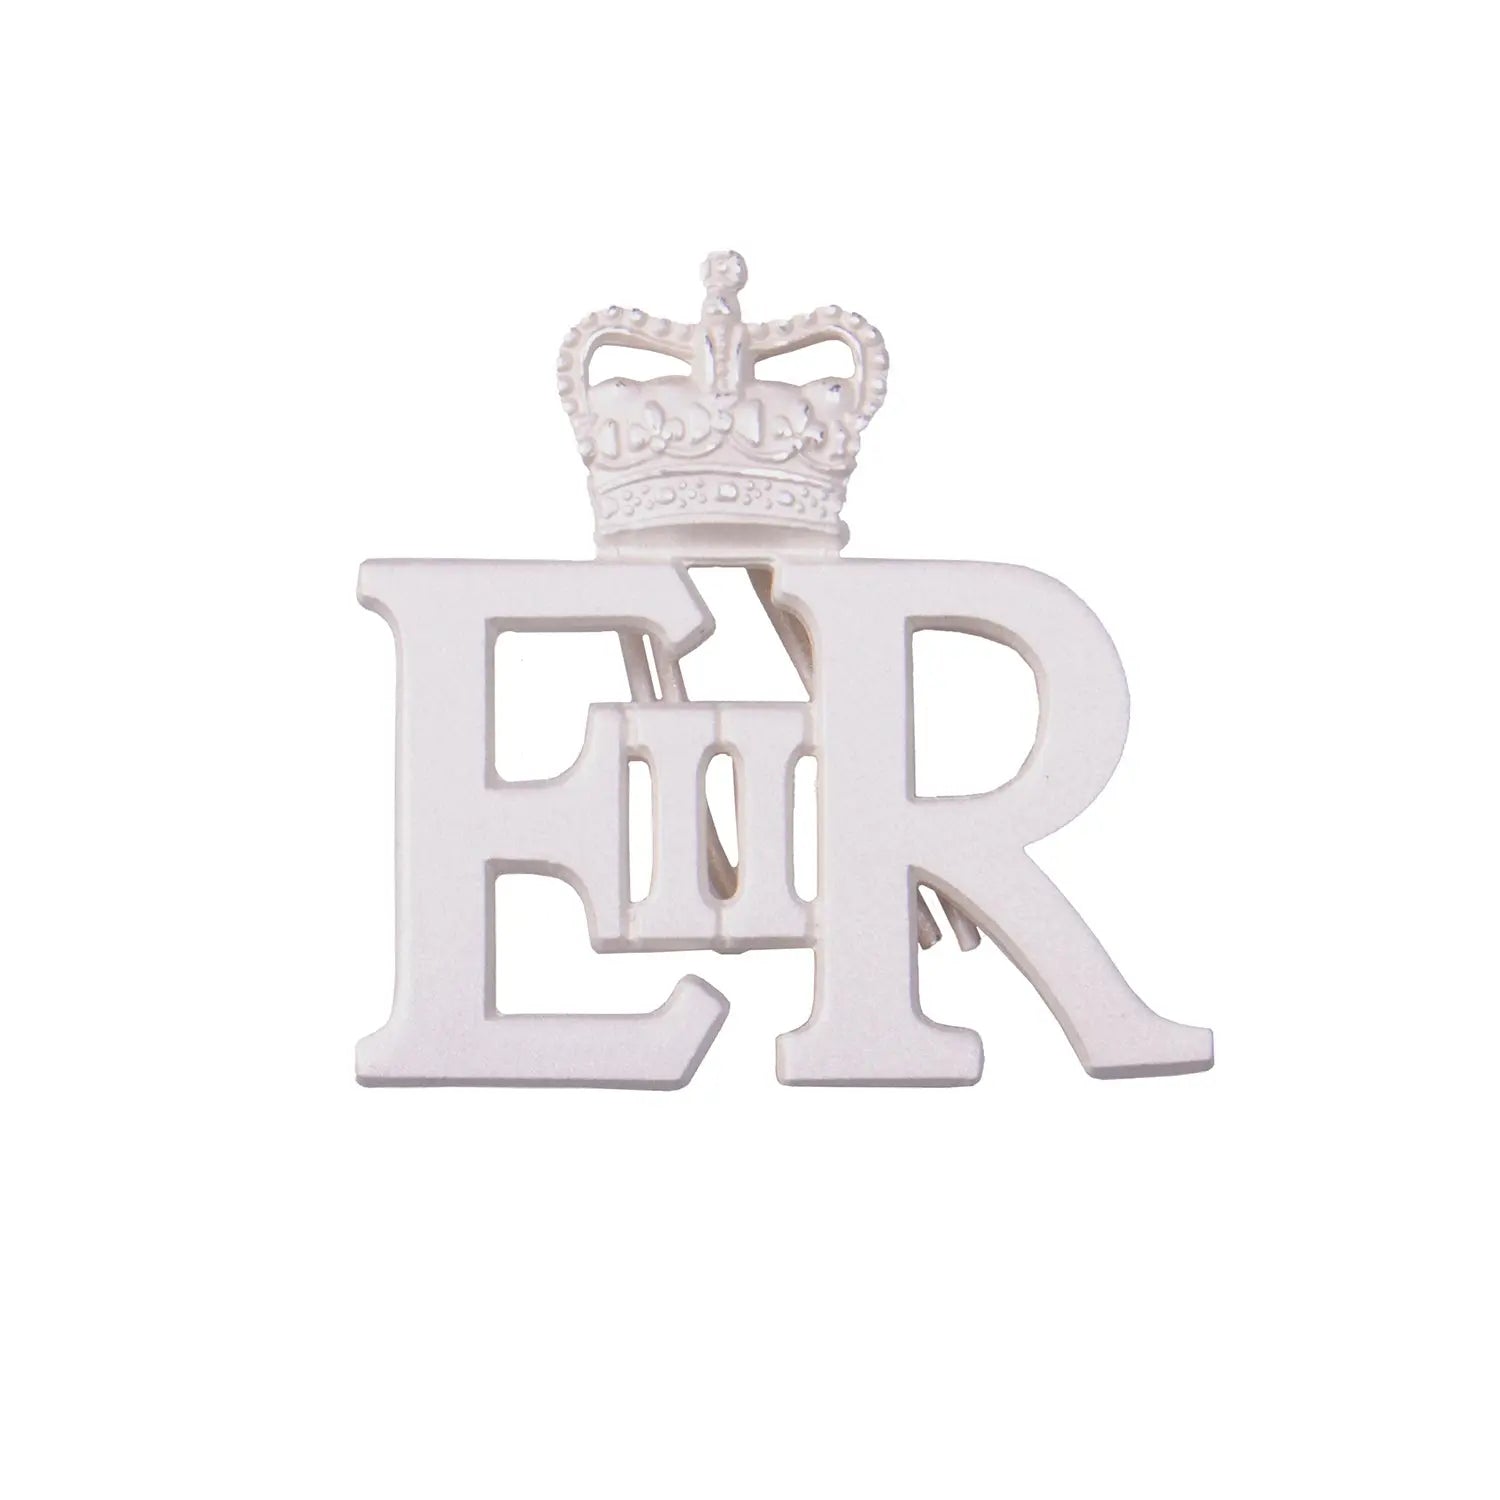 EIIR with Crown Cypher Silver Badge Soft Prongs Royal Navy wyedean